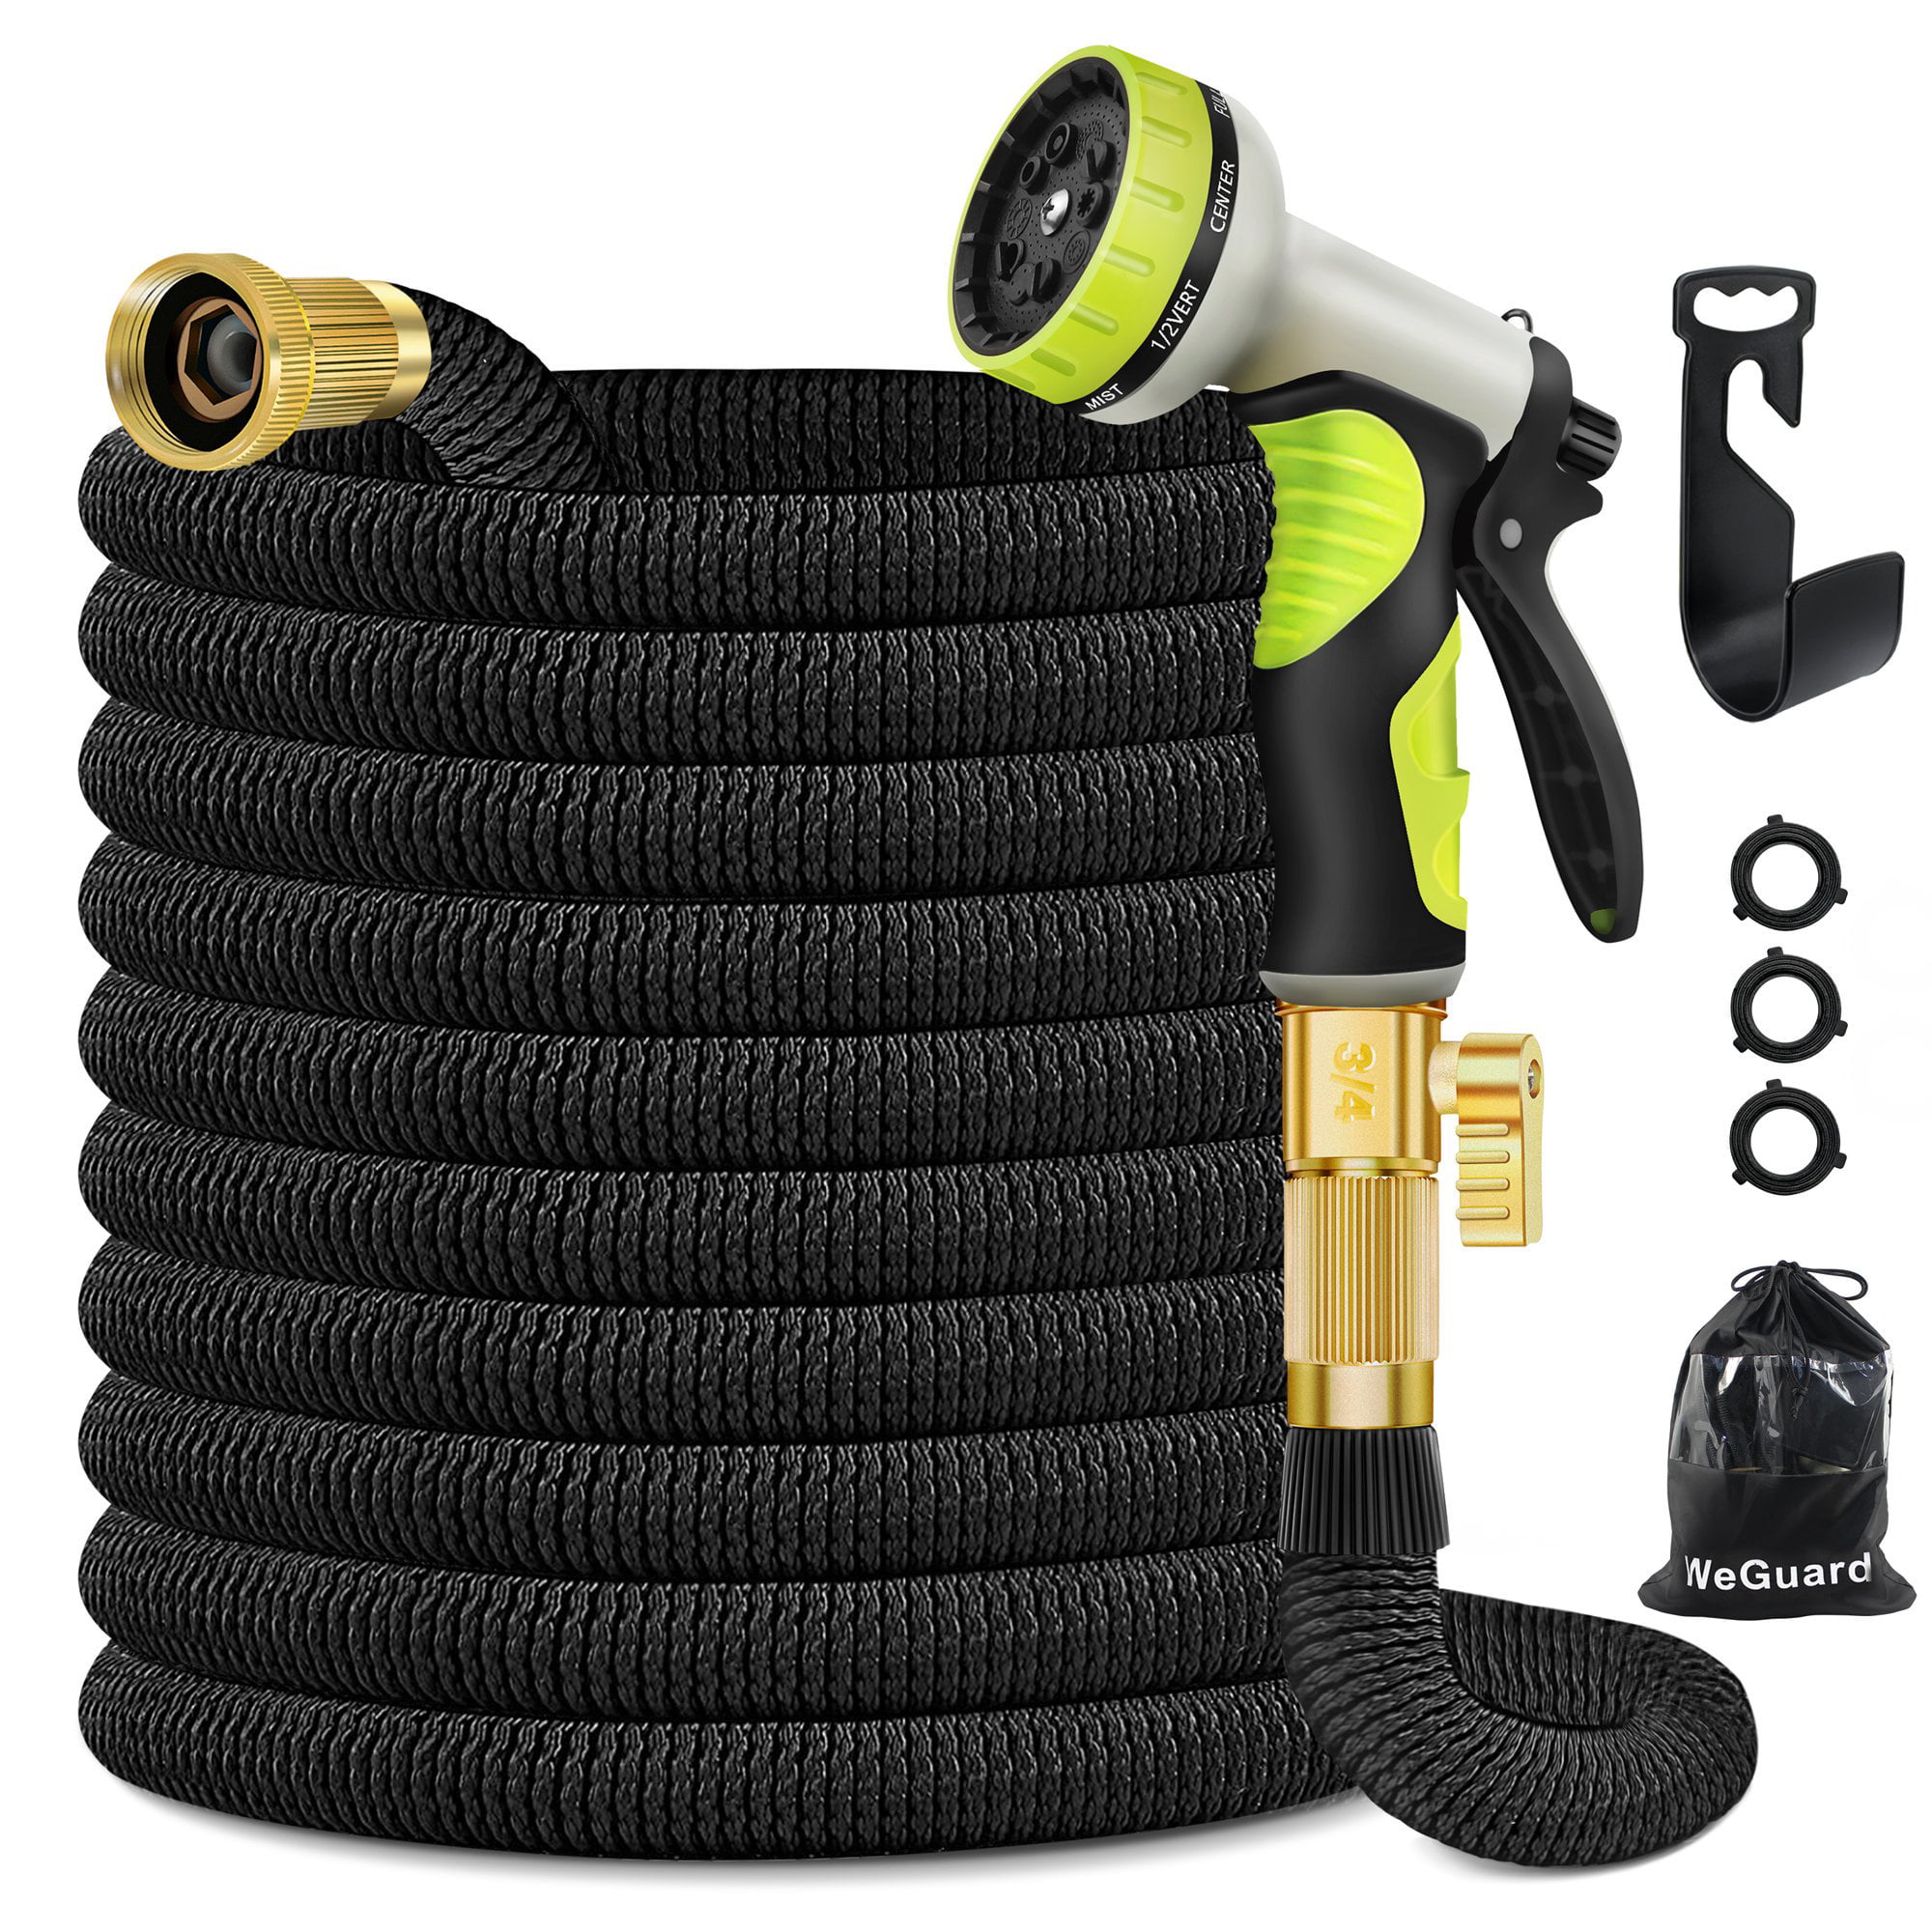 50/75/100FT Flexible Expandable Garden Water Hose with 9 Function Spray Nozzle 